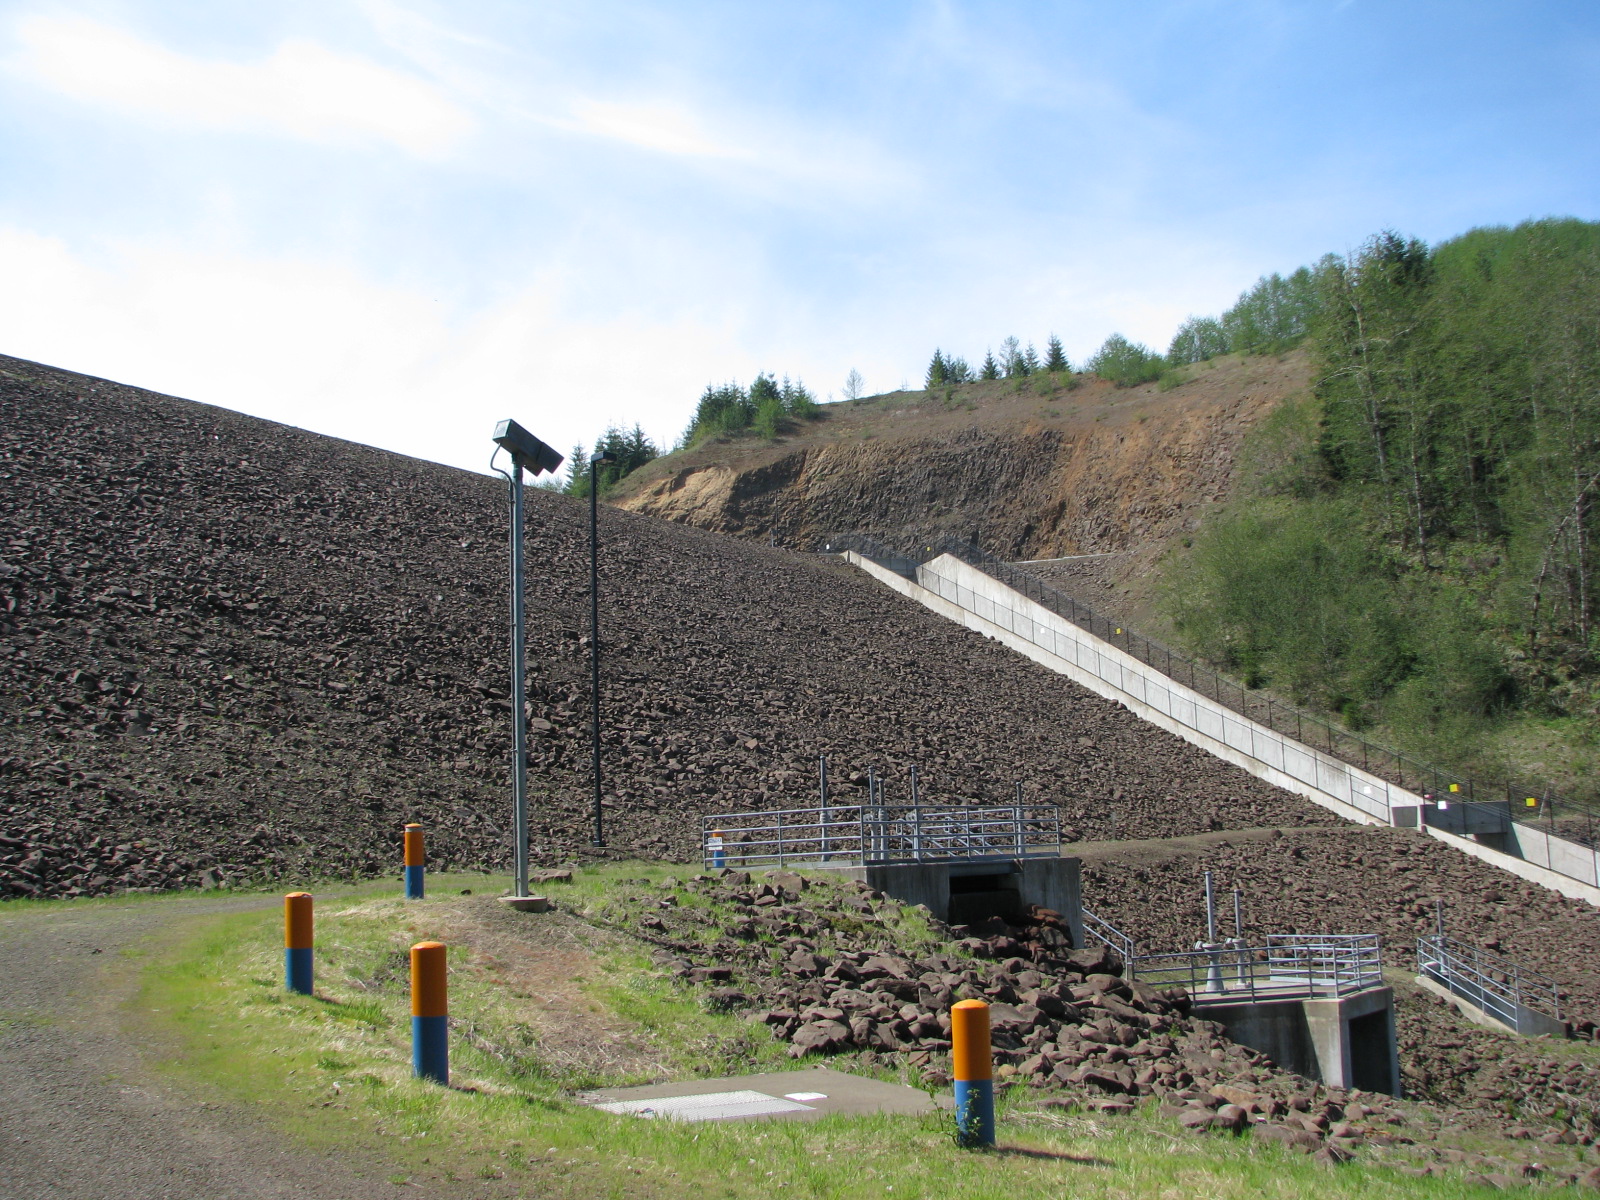 A photo of a dam just outside of McMinnville. The photo shows the embankment, emergency spillway and outlet.